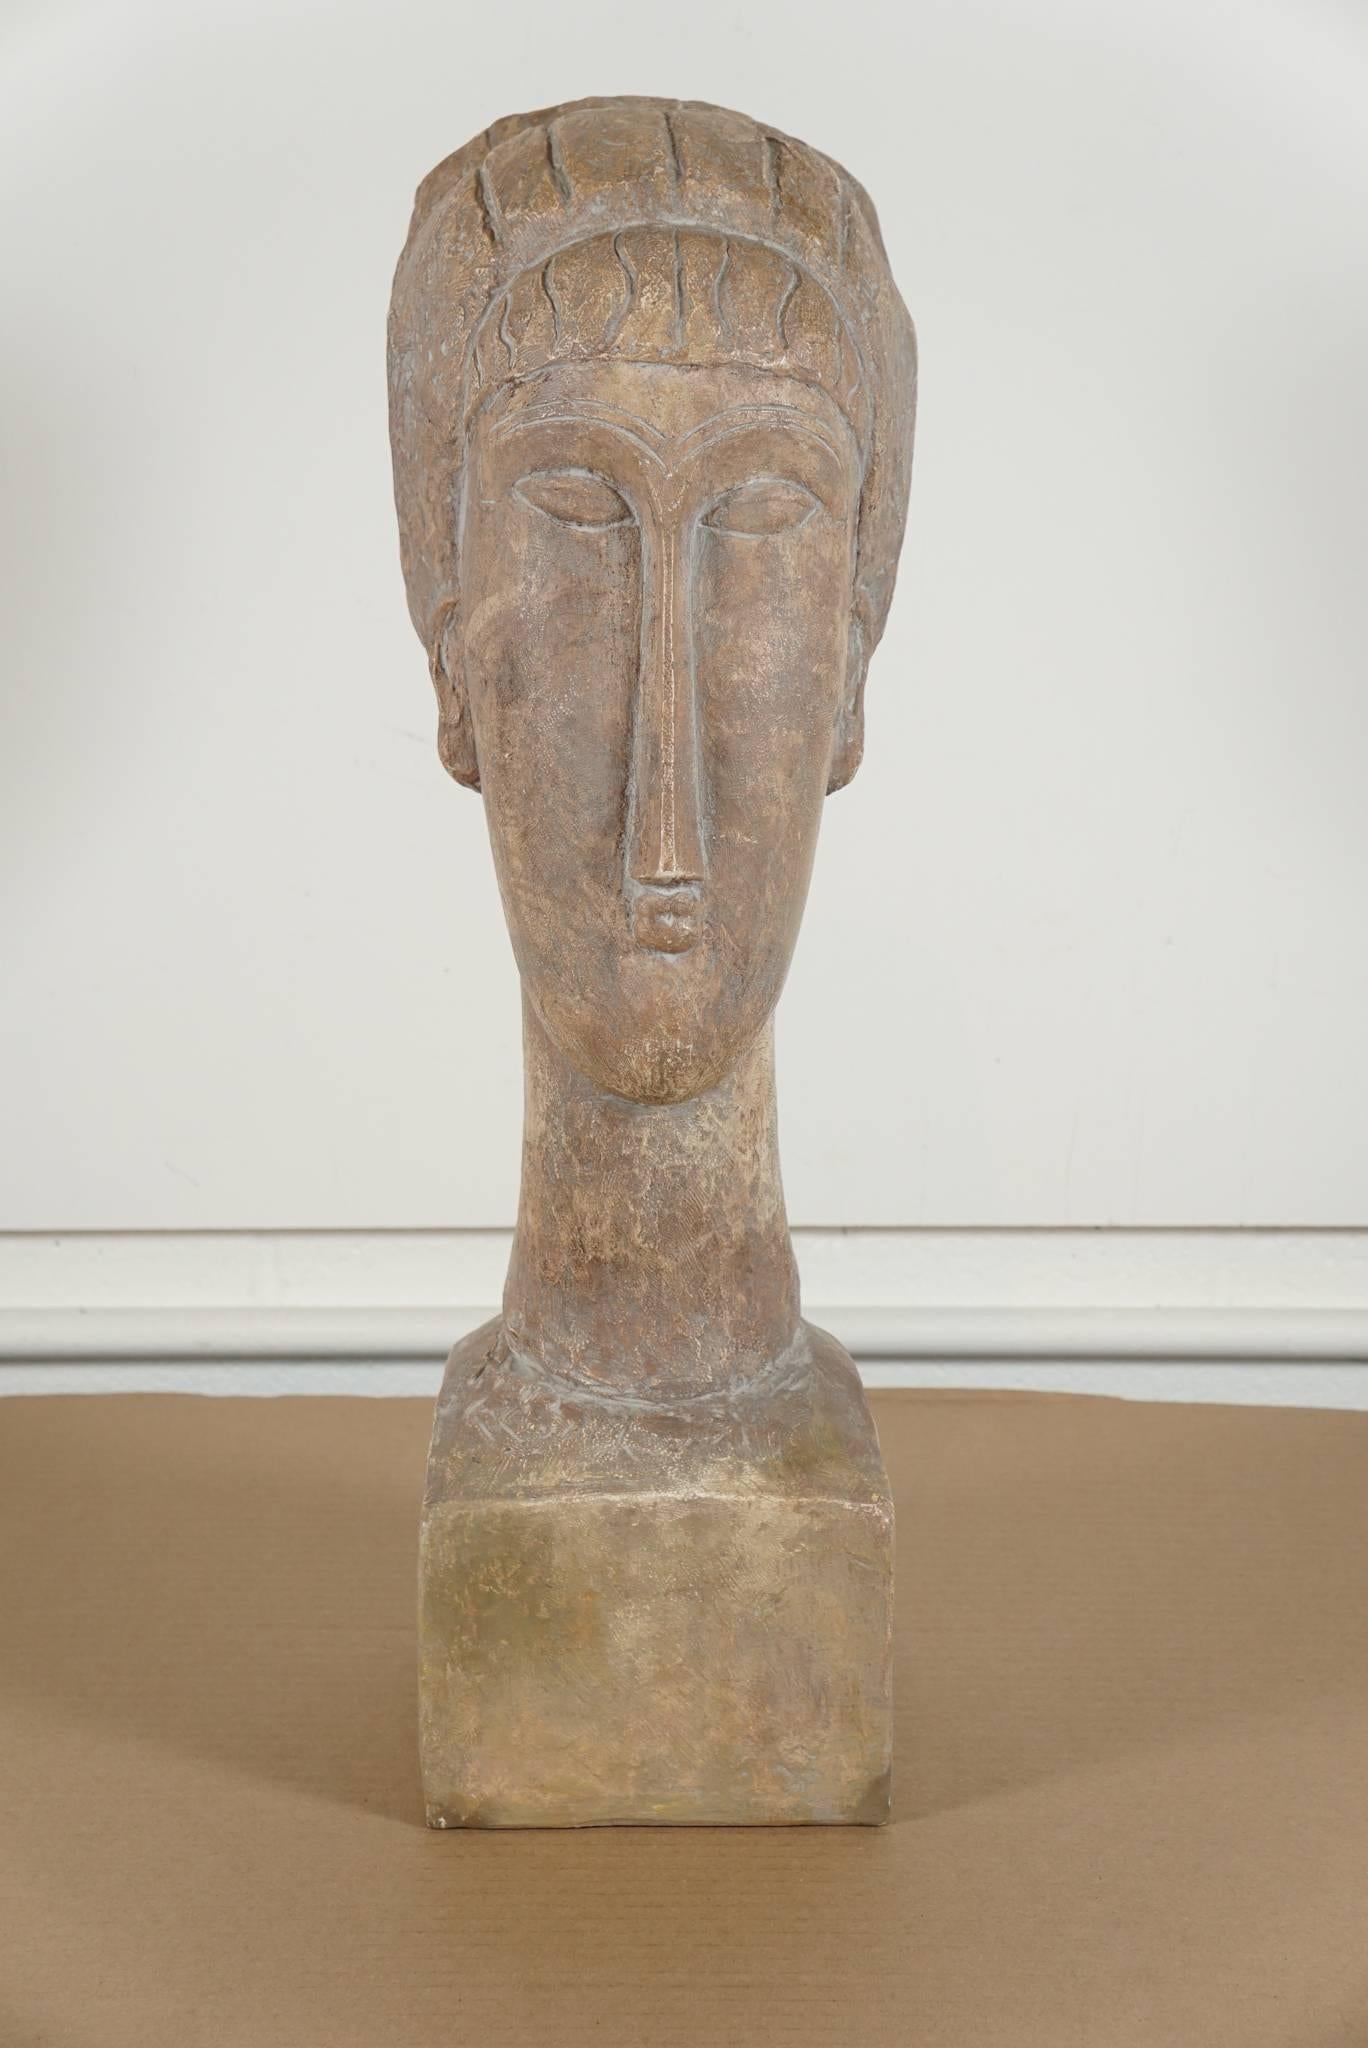 Here is a great ceramic bust in the style of a Modigliani stone sculpture.
The sculpture is both modern and primitive in it's style.